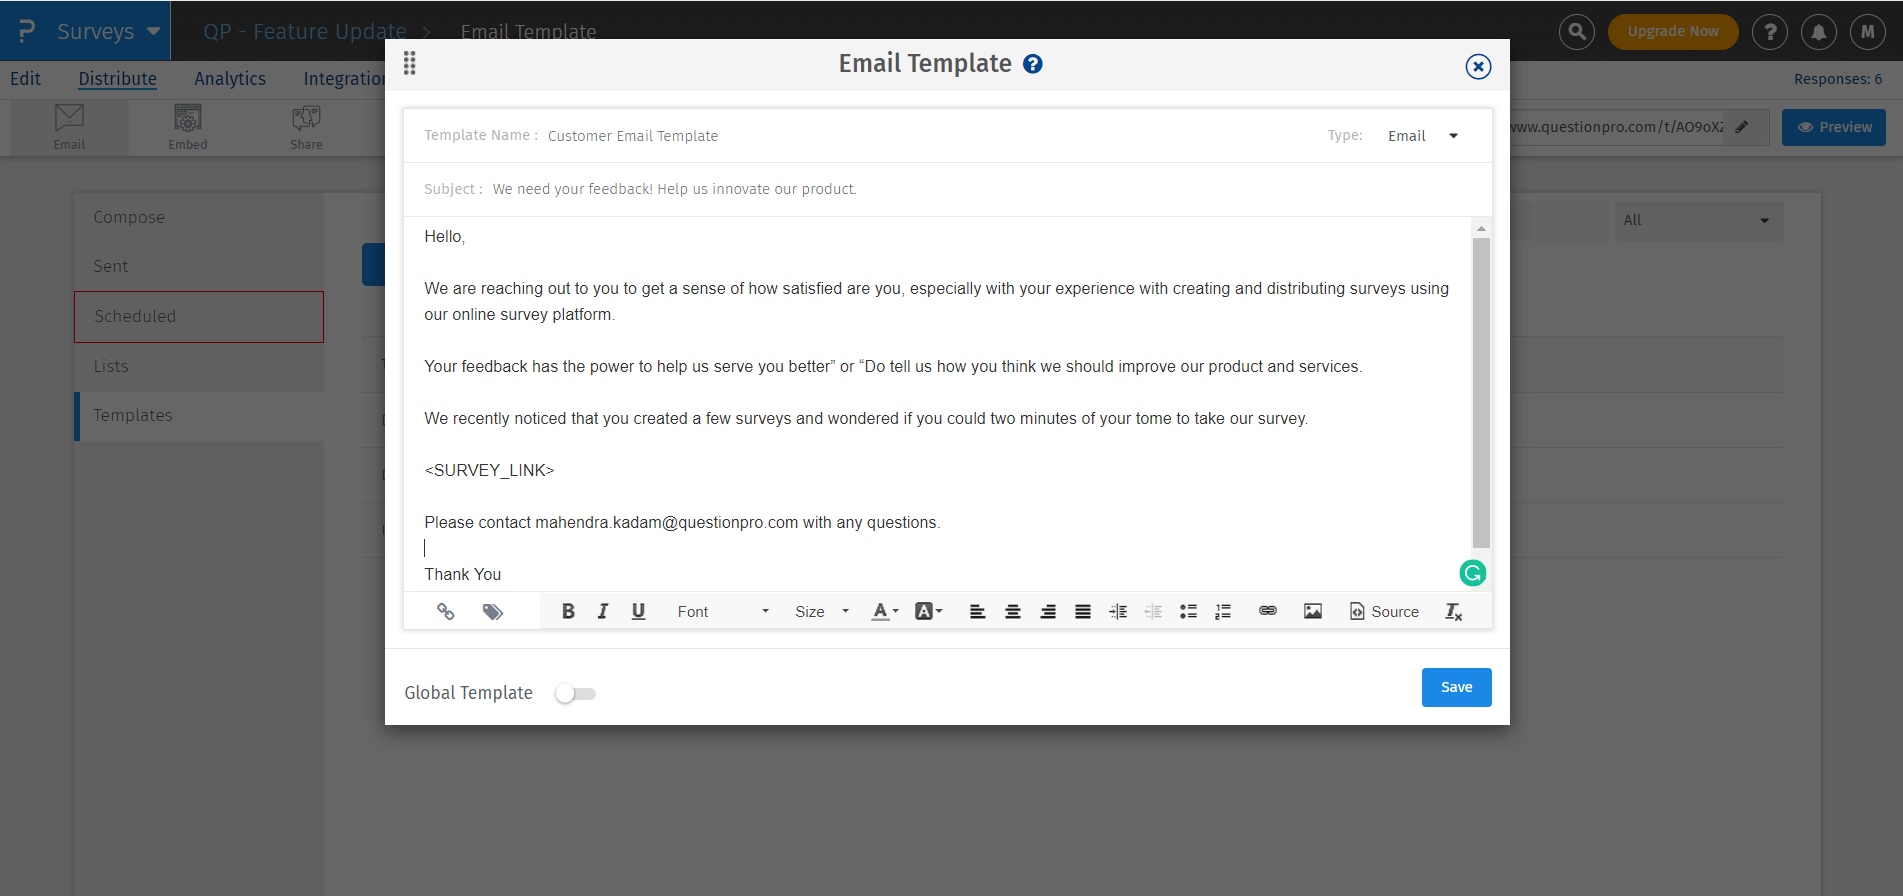 Email-template-update-1